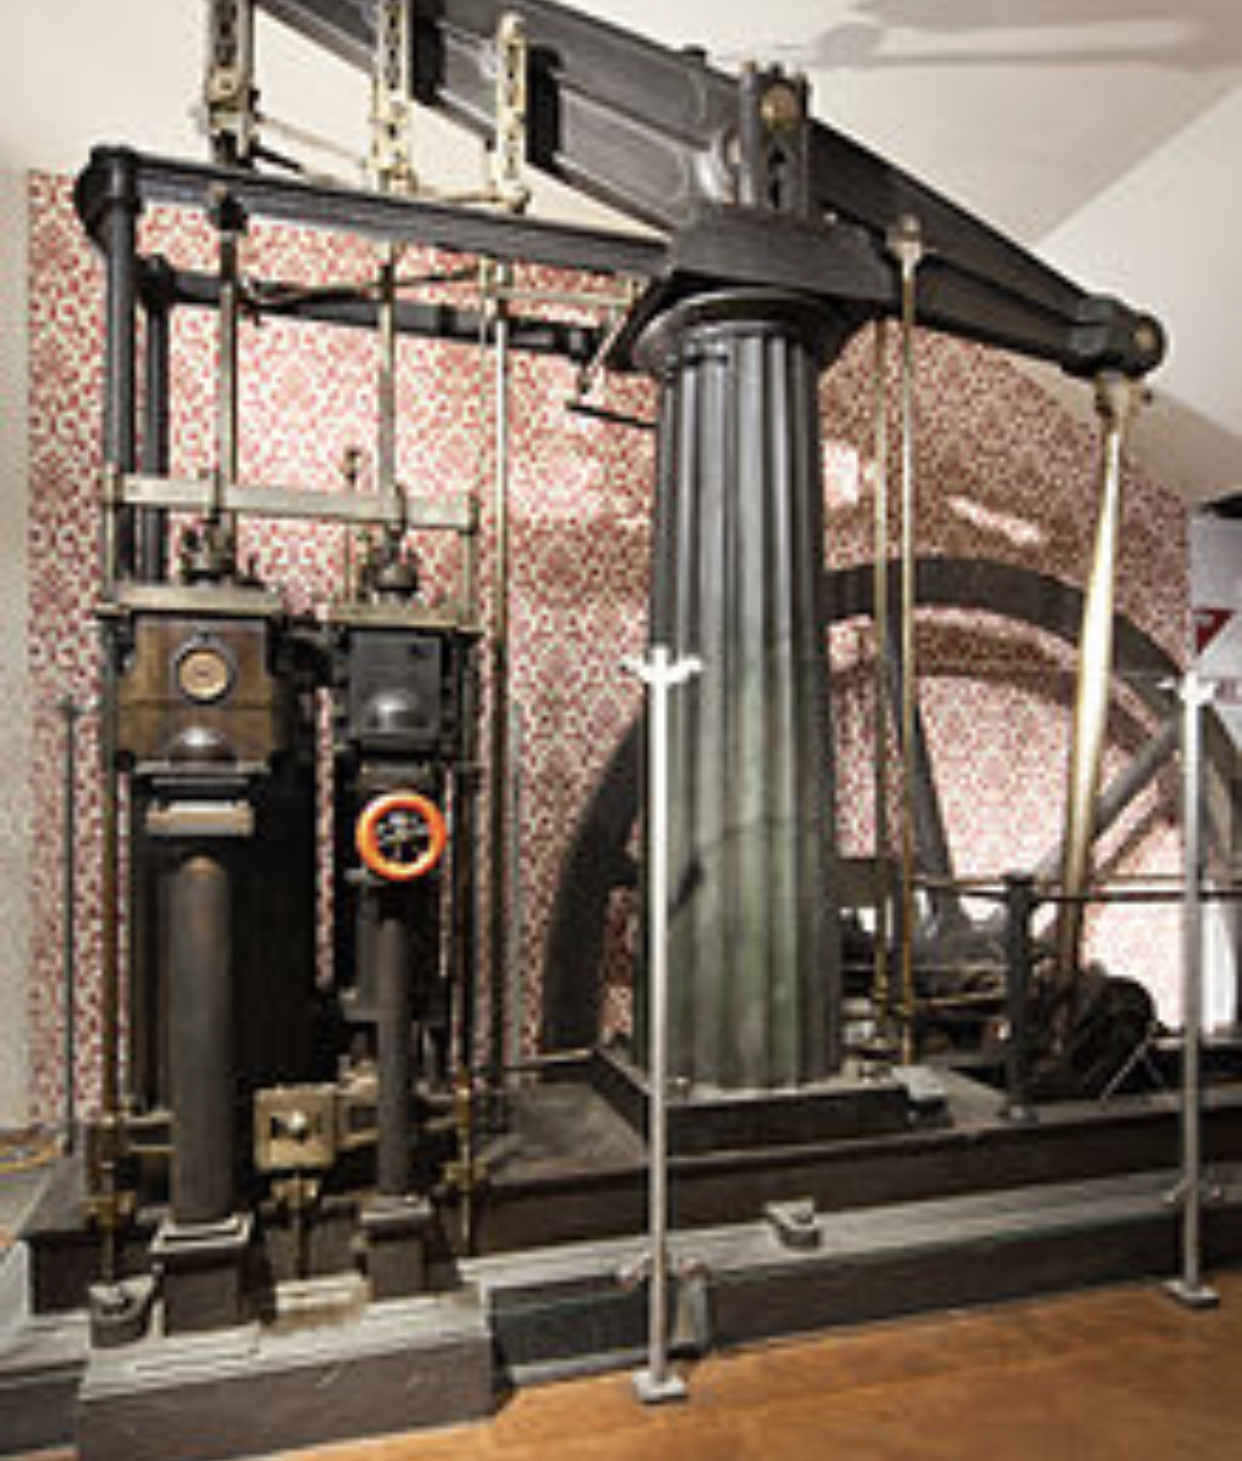 Museums, narratives, and beam engines